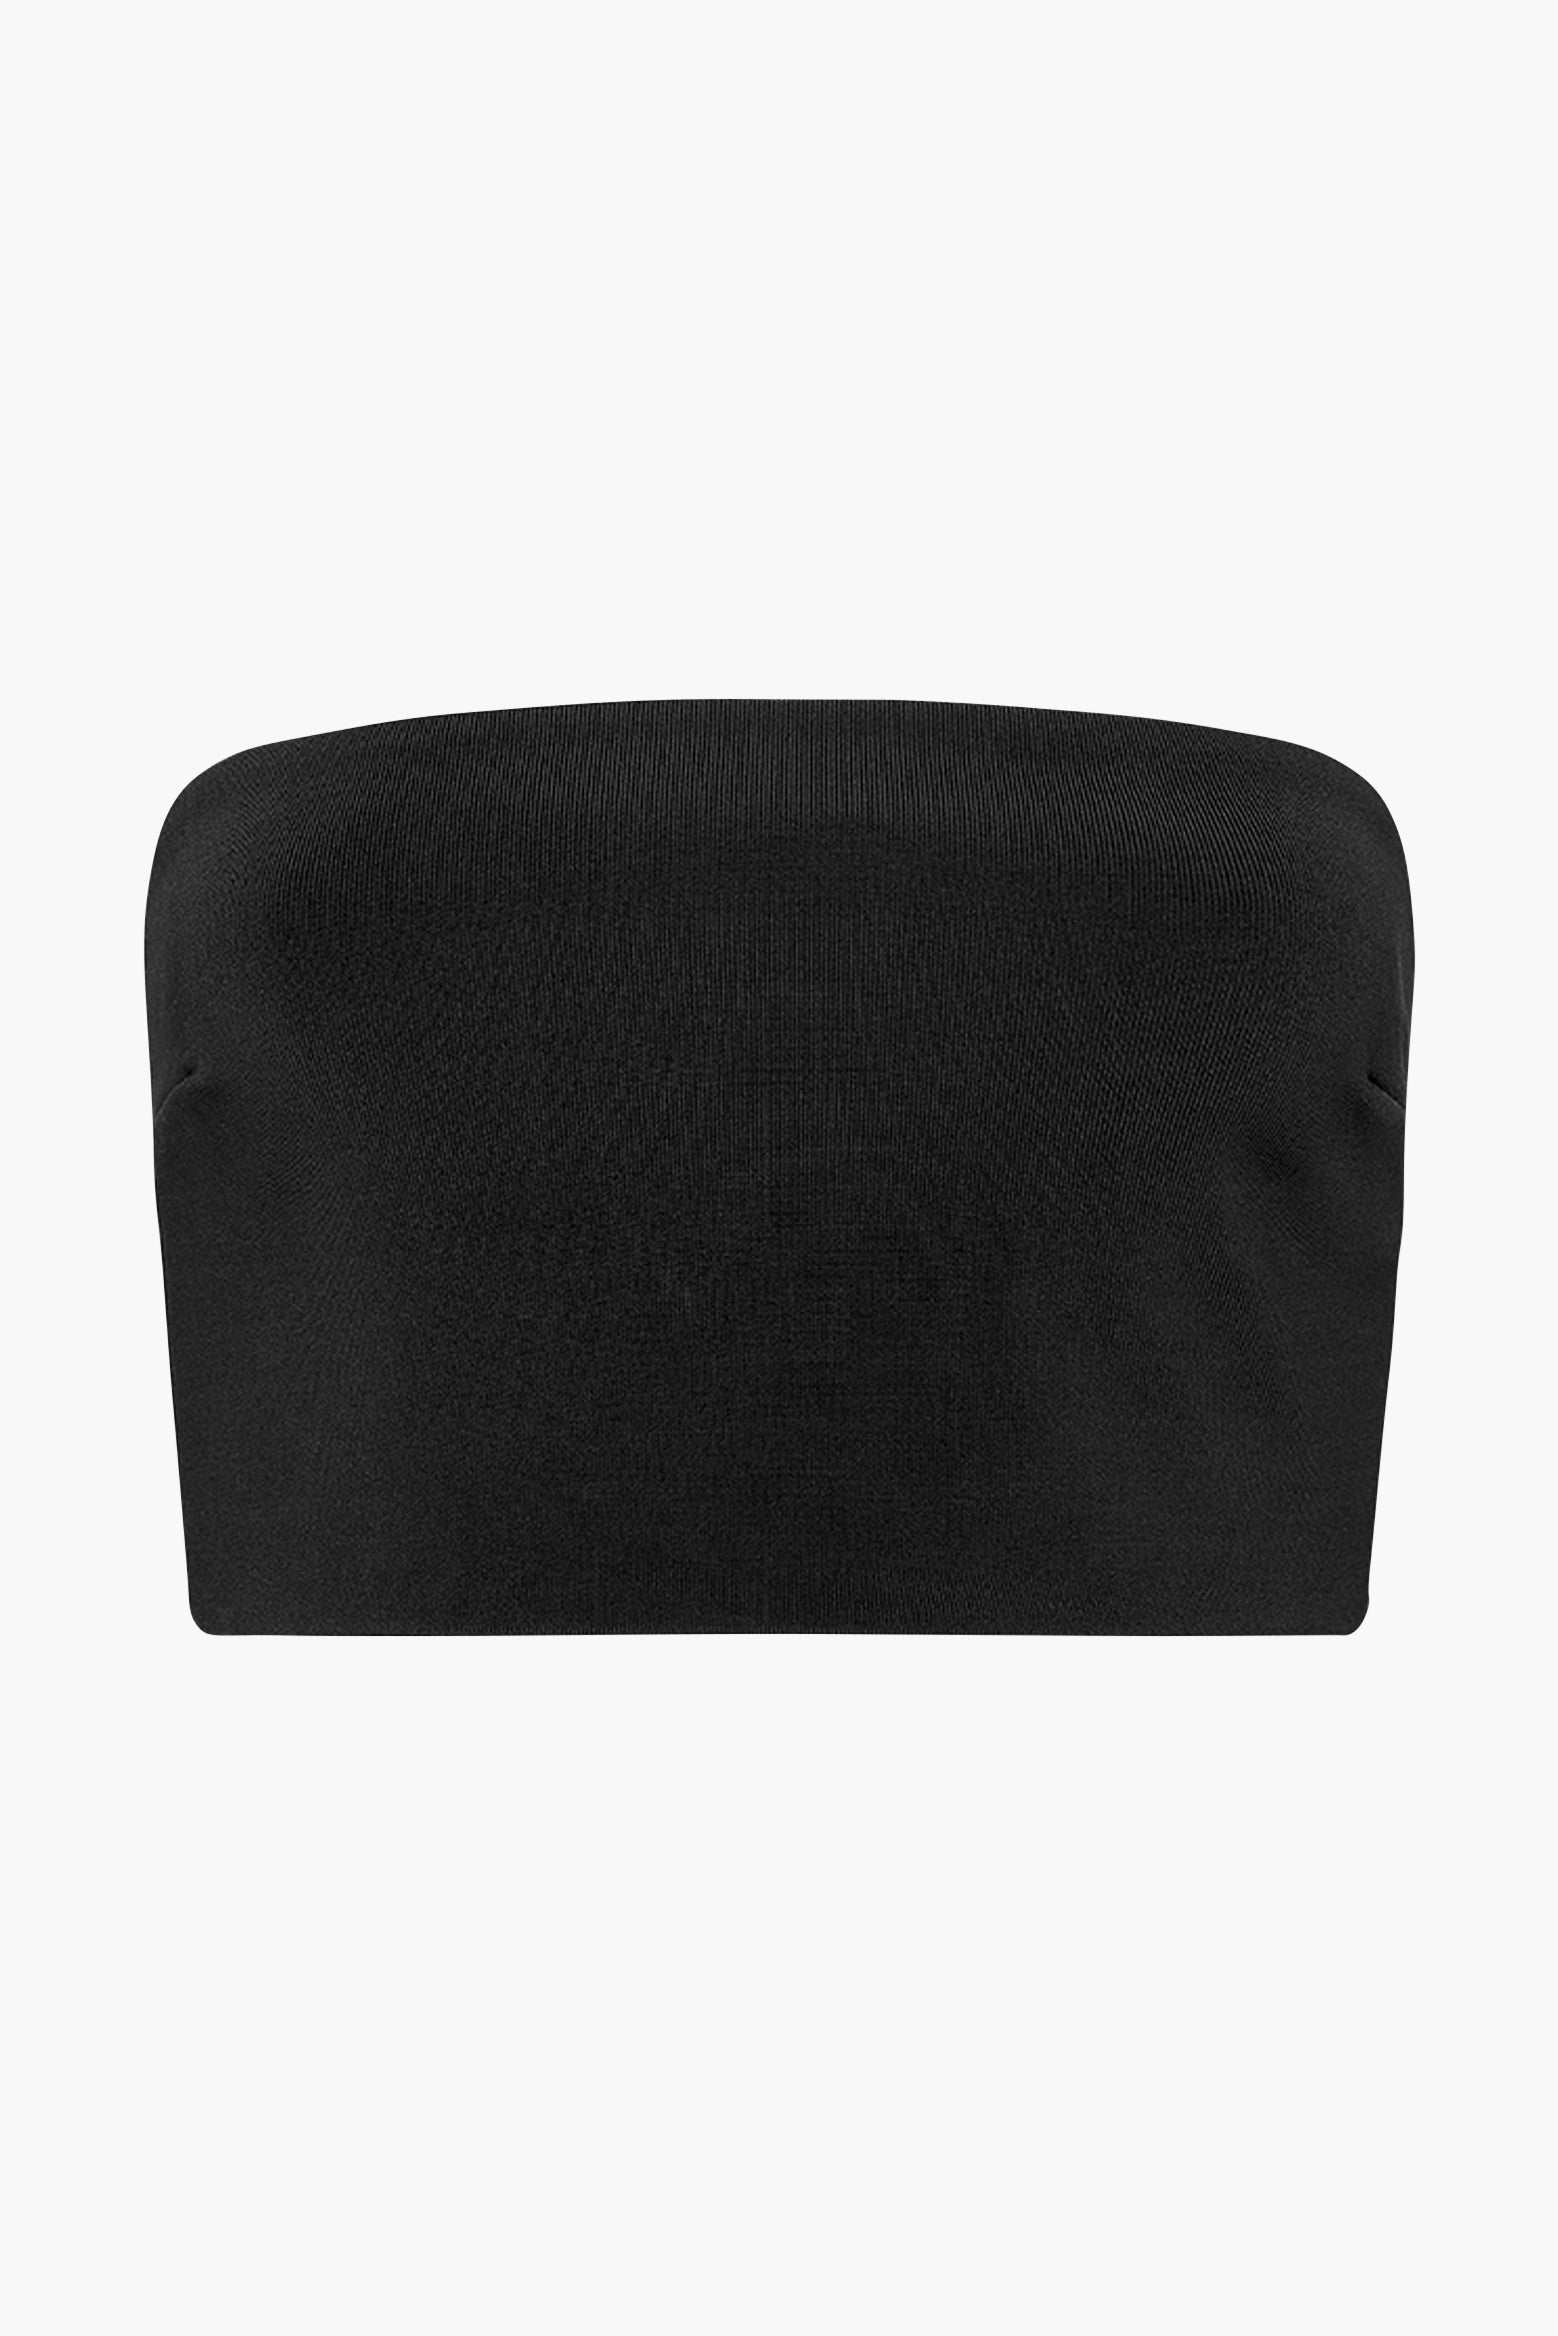 Esse Knit Tube Top in Black available at TNT The New Trend Australia.